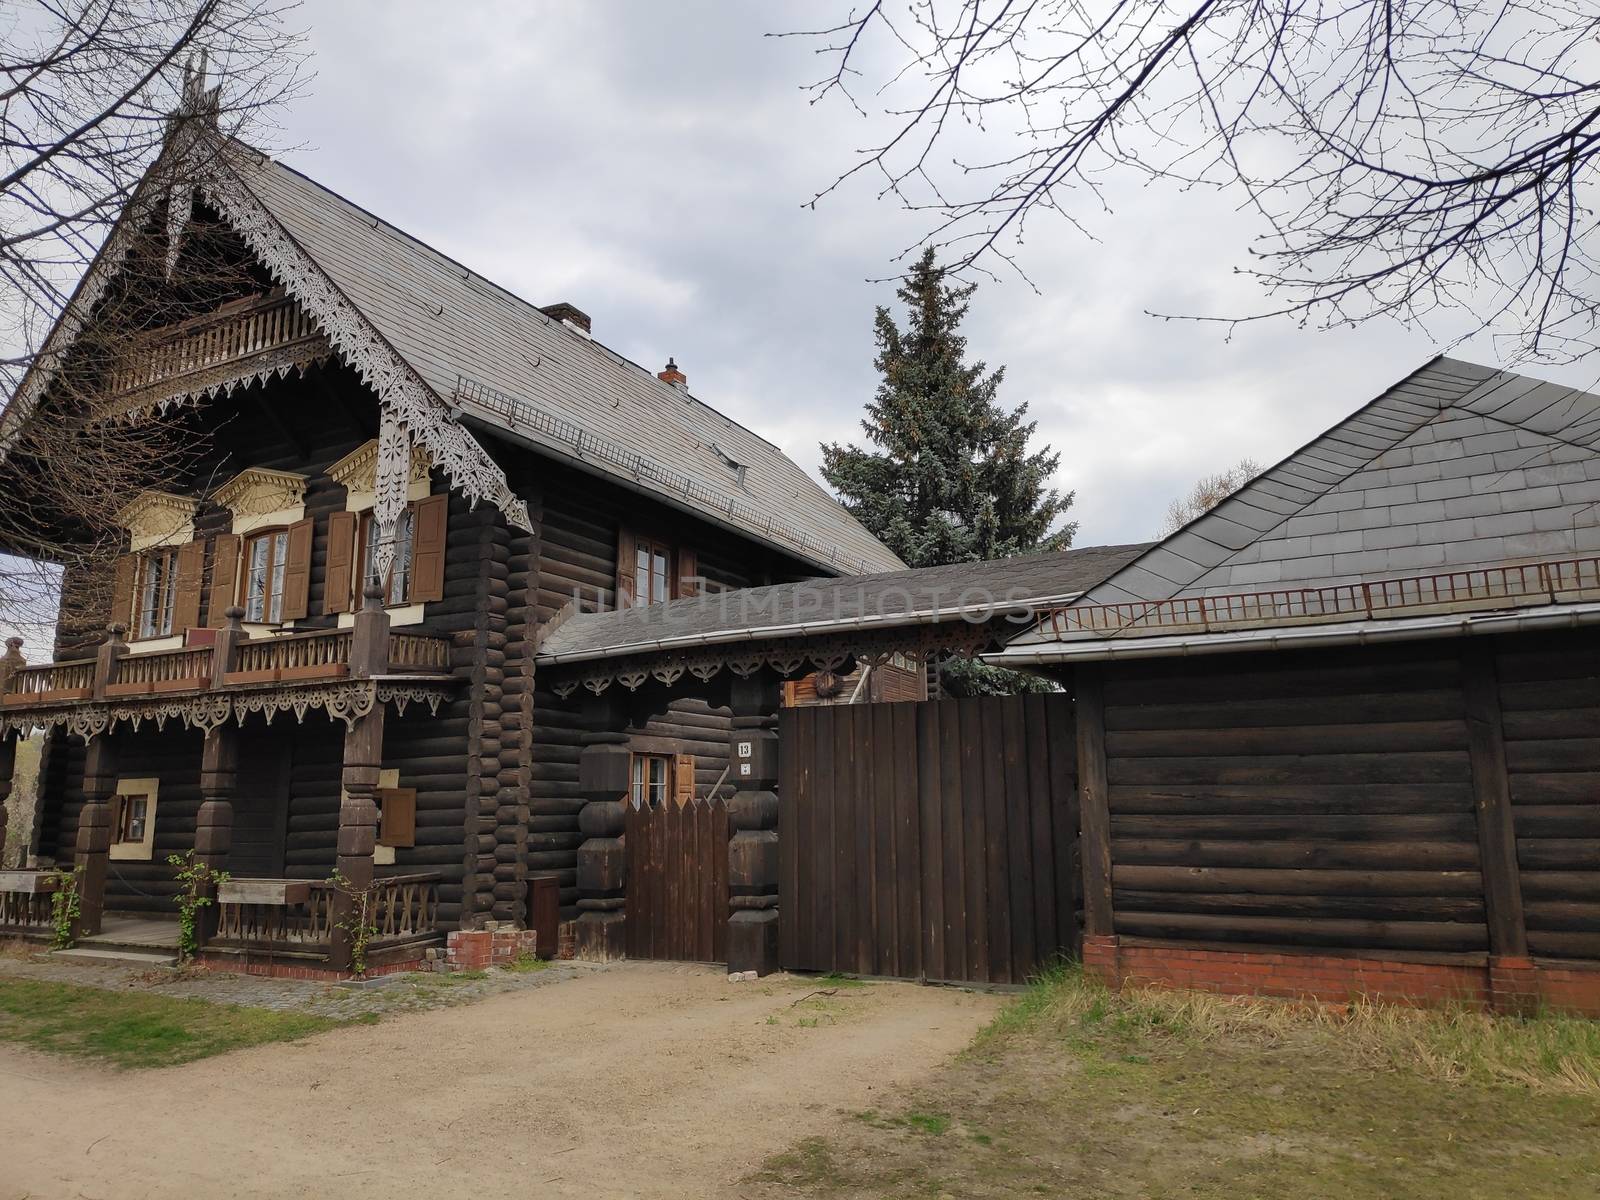 Alexandrovka settlement Potsdam, Germany - typical wooden house by pisces2386